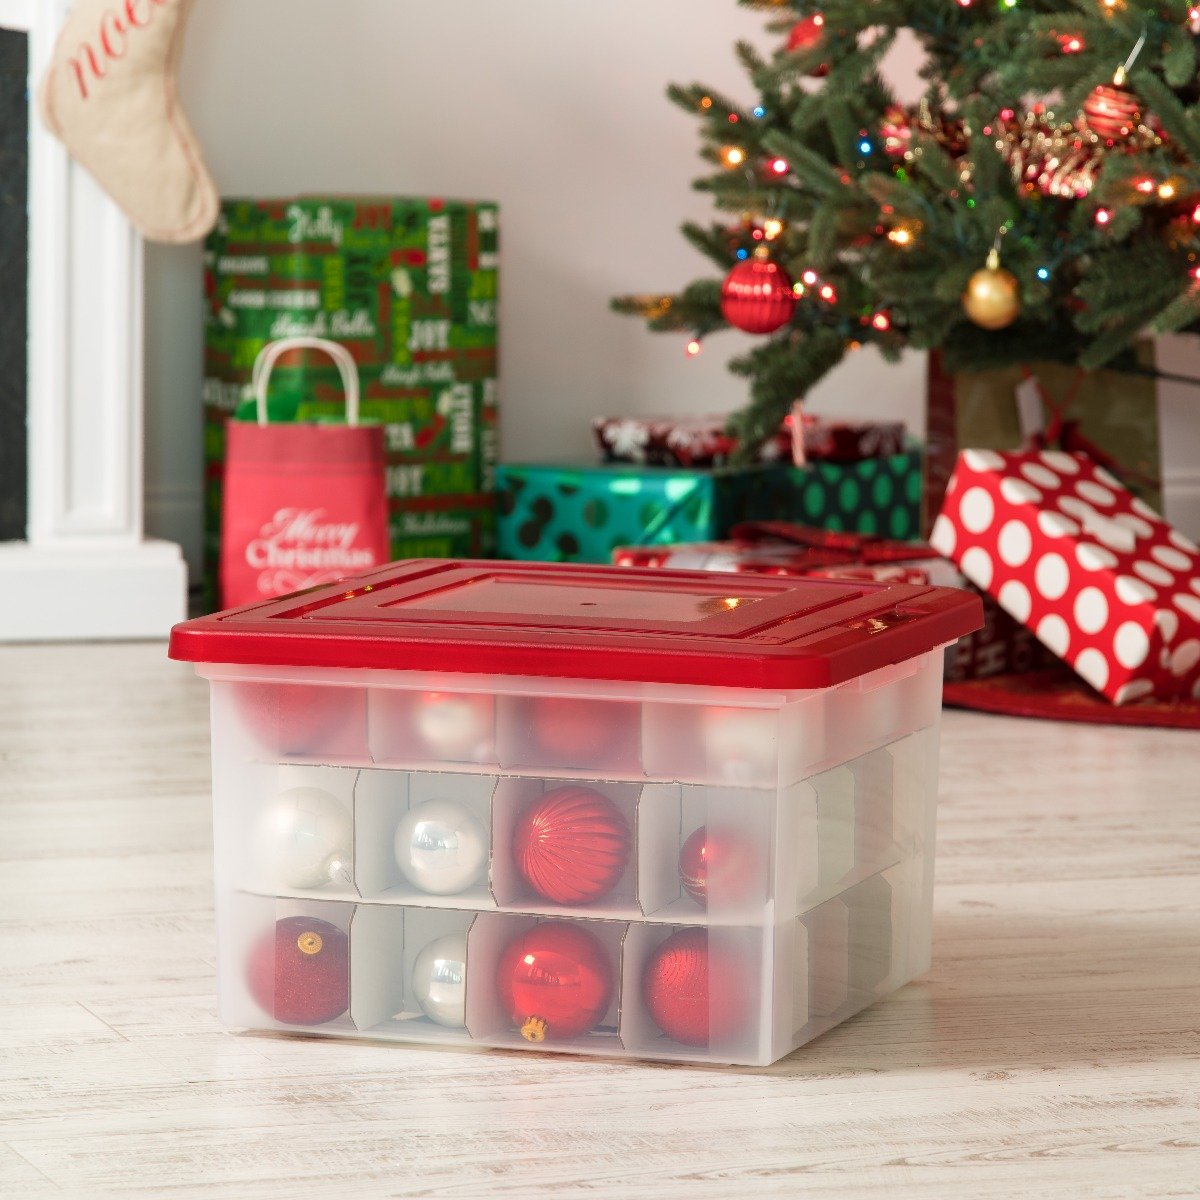 IRIS USA 2Pack 60qt Plastic Clear Ornament Storage Box with Hinged Lid and  Dividers, Red, 2 units - Kroger